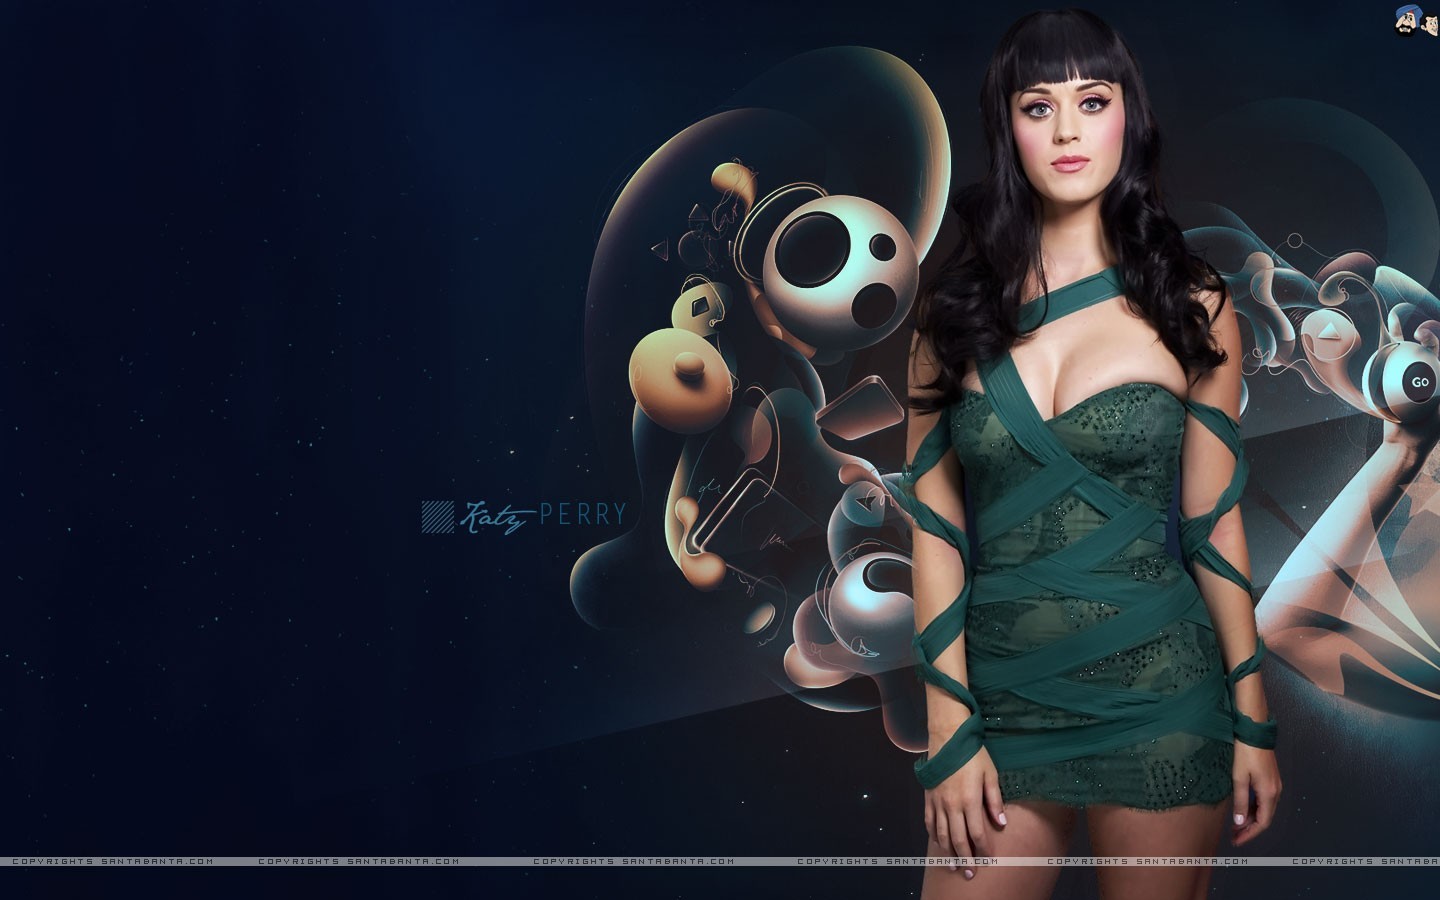 Katy Perry Wallpaper on Katy Perry Hd Wallpaper   Celebrity   Actress   826000